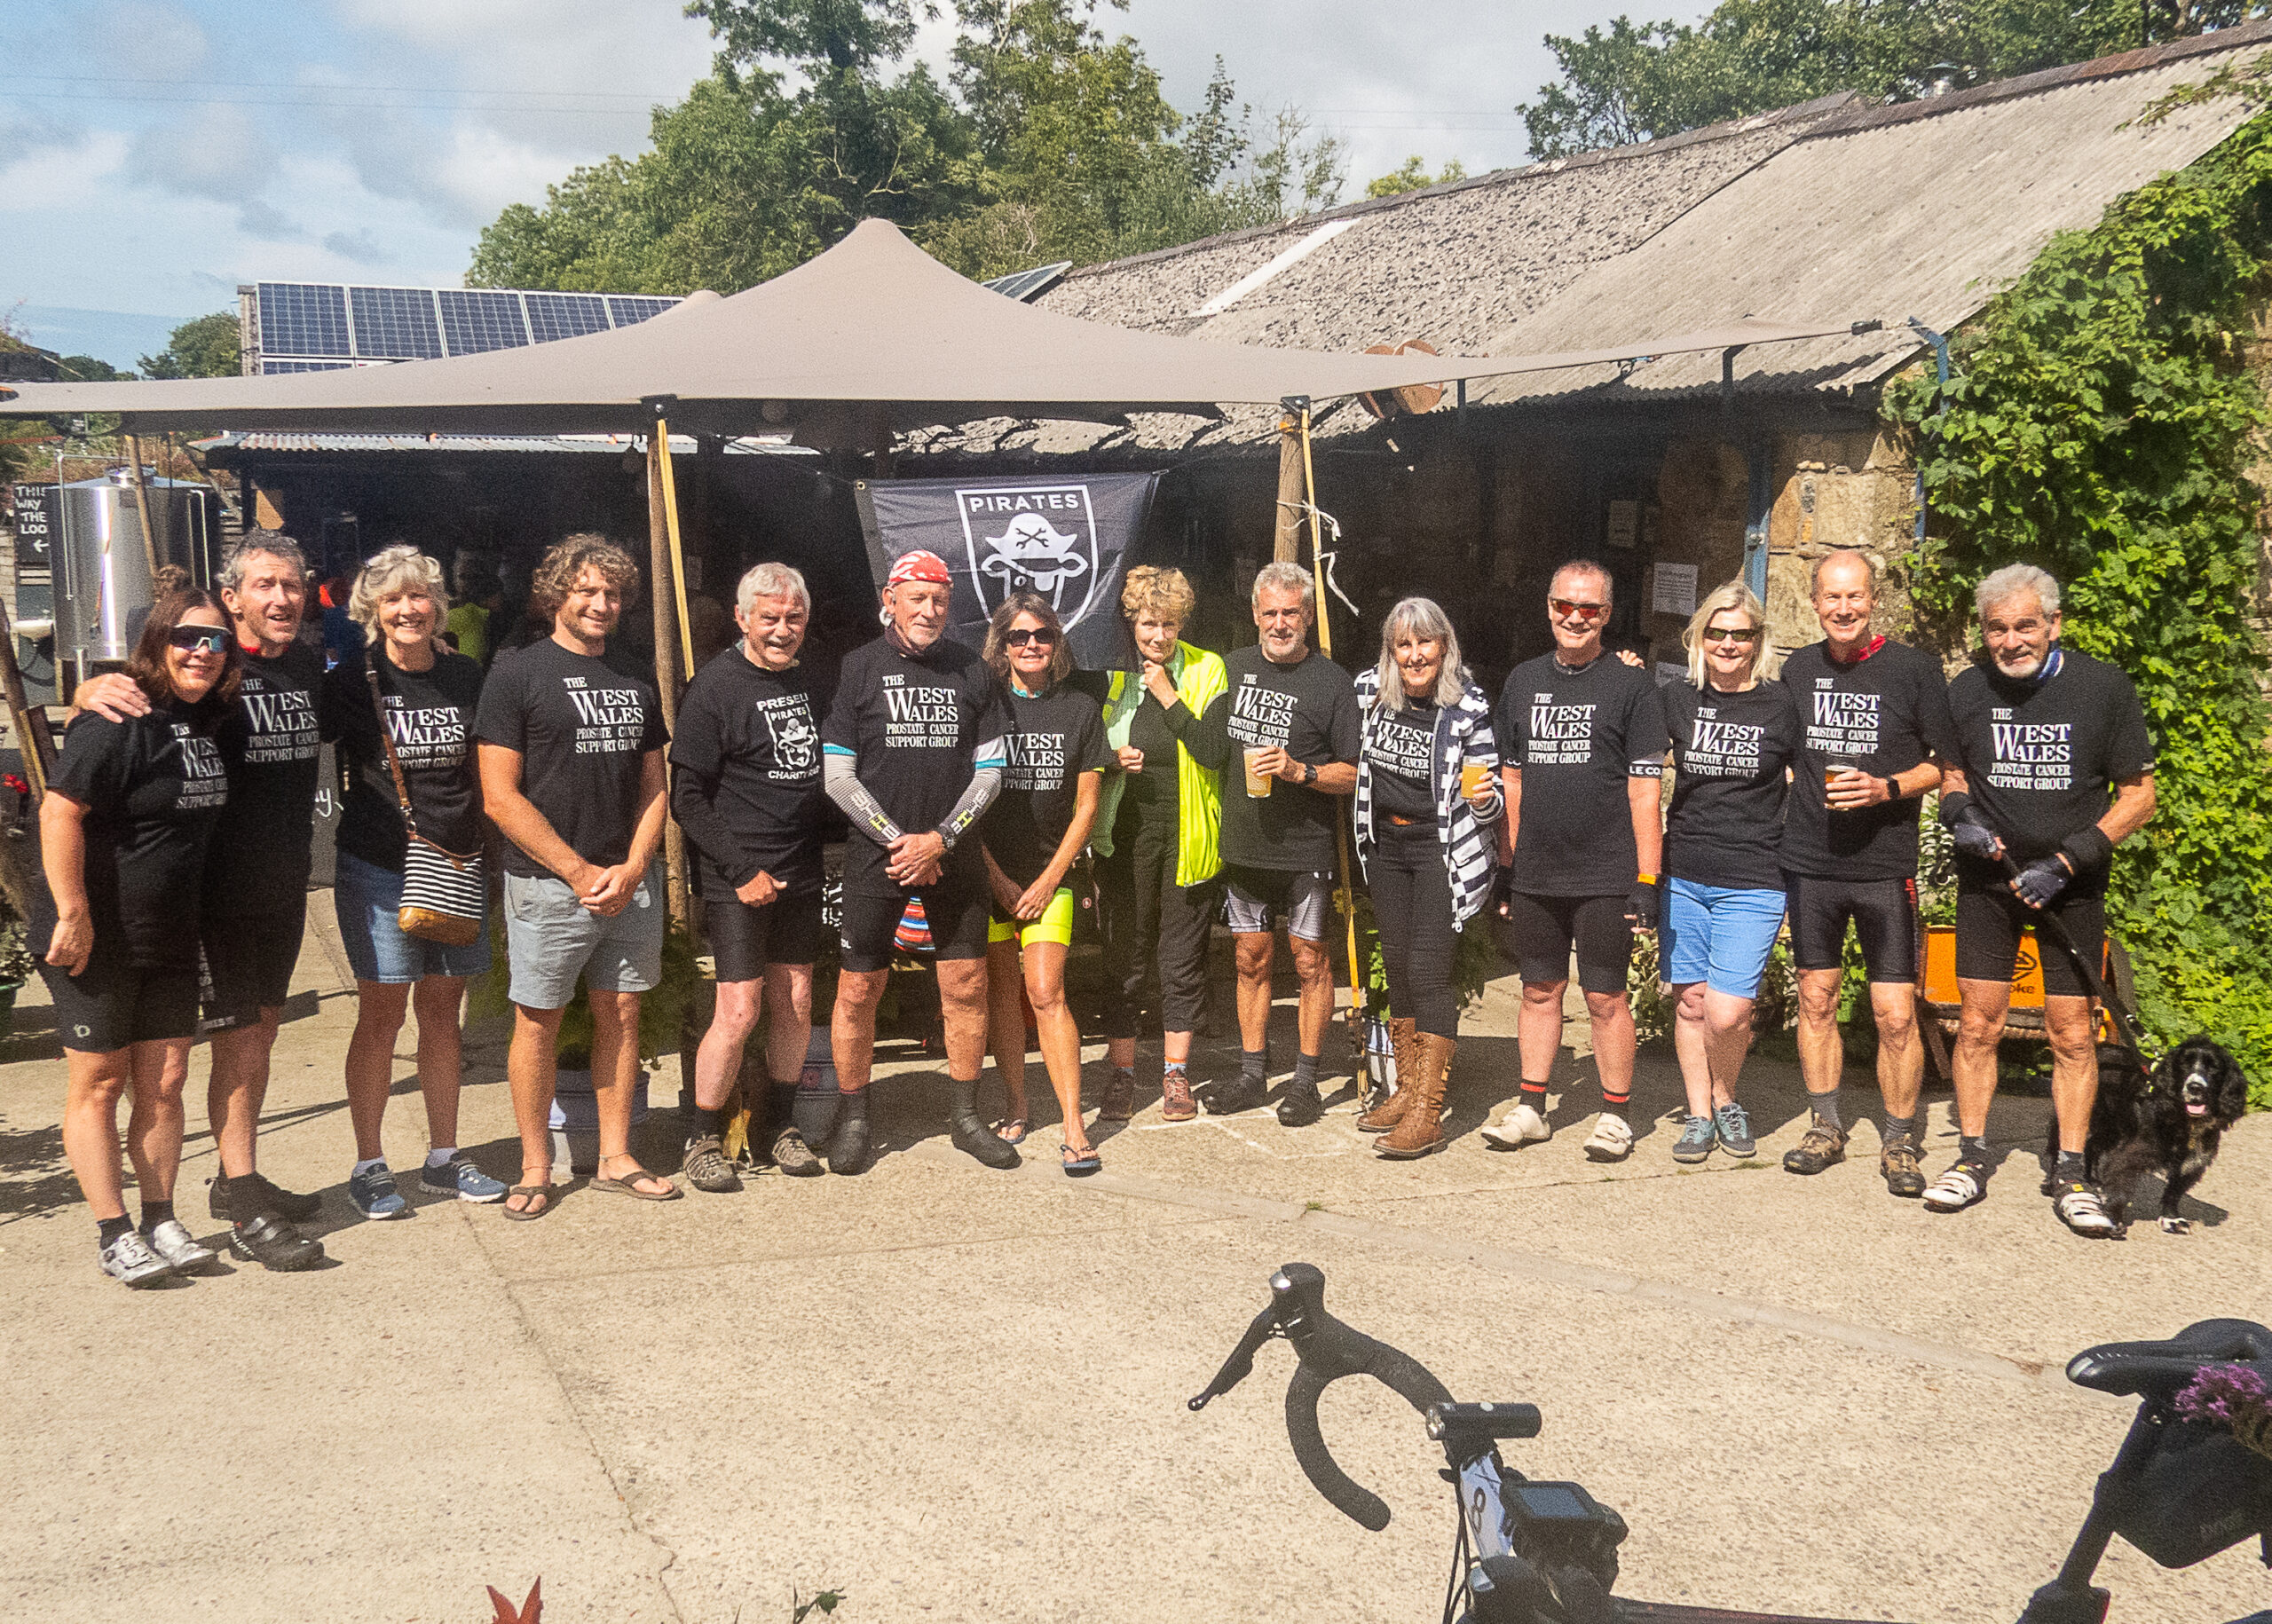 Some of the riders ready to go wearing the T shirts for the event. Peter and his wife Julie are 2nd and 3rd from the left.